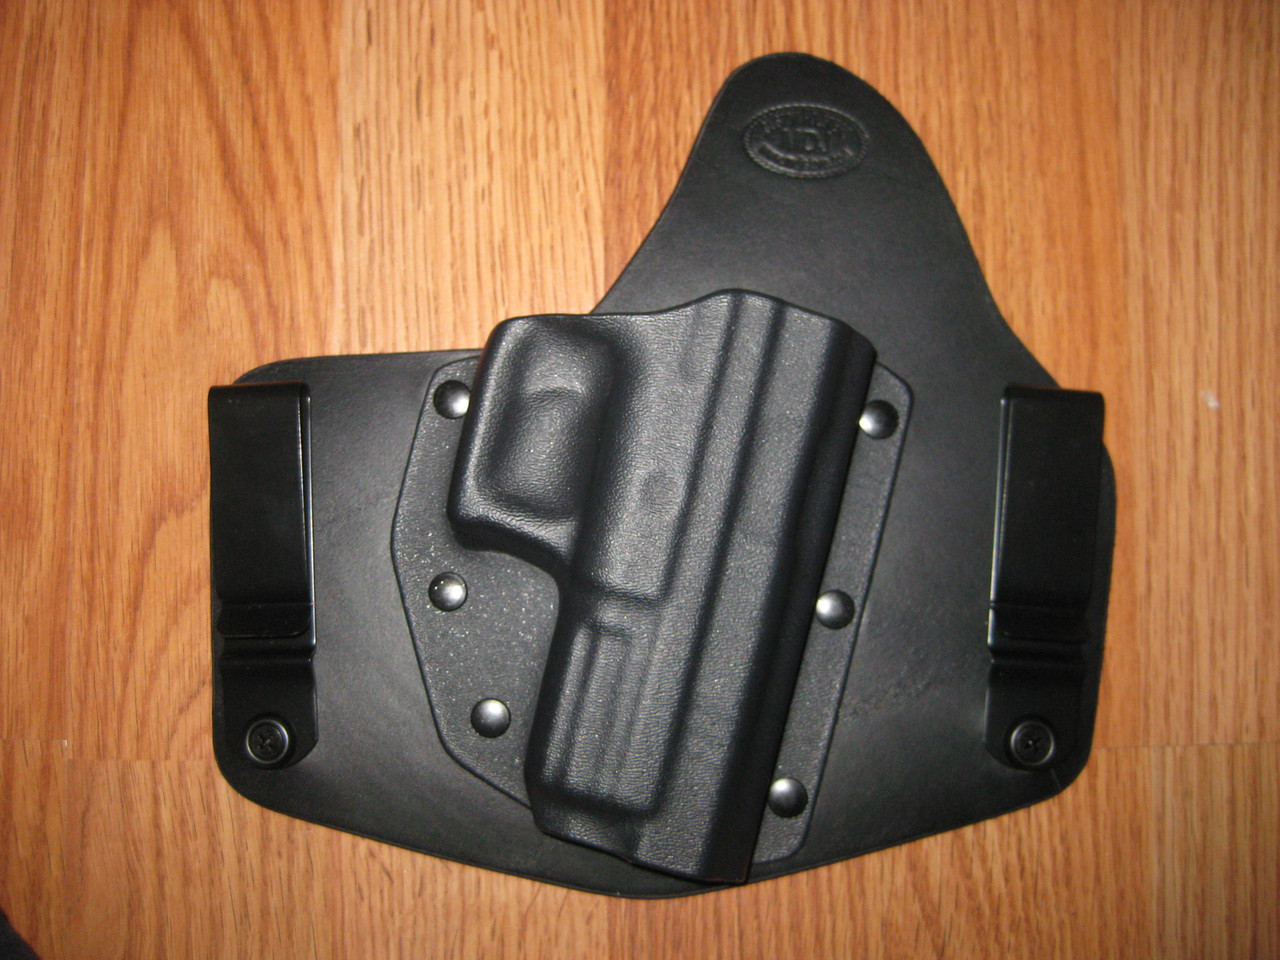 OWB Kydex/Leather Hybrid Holster adjustable retention for Springfield Armory 